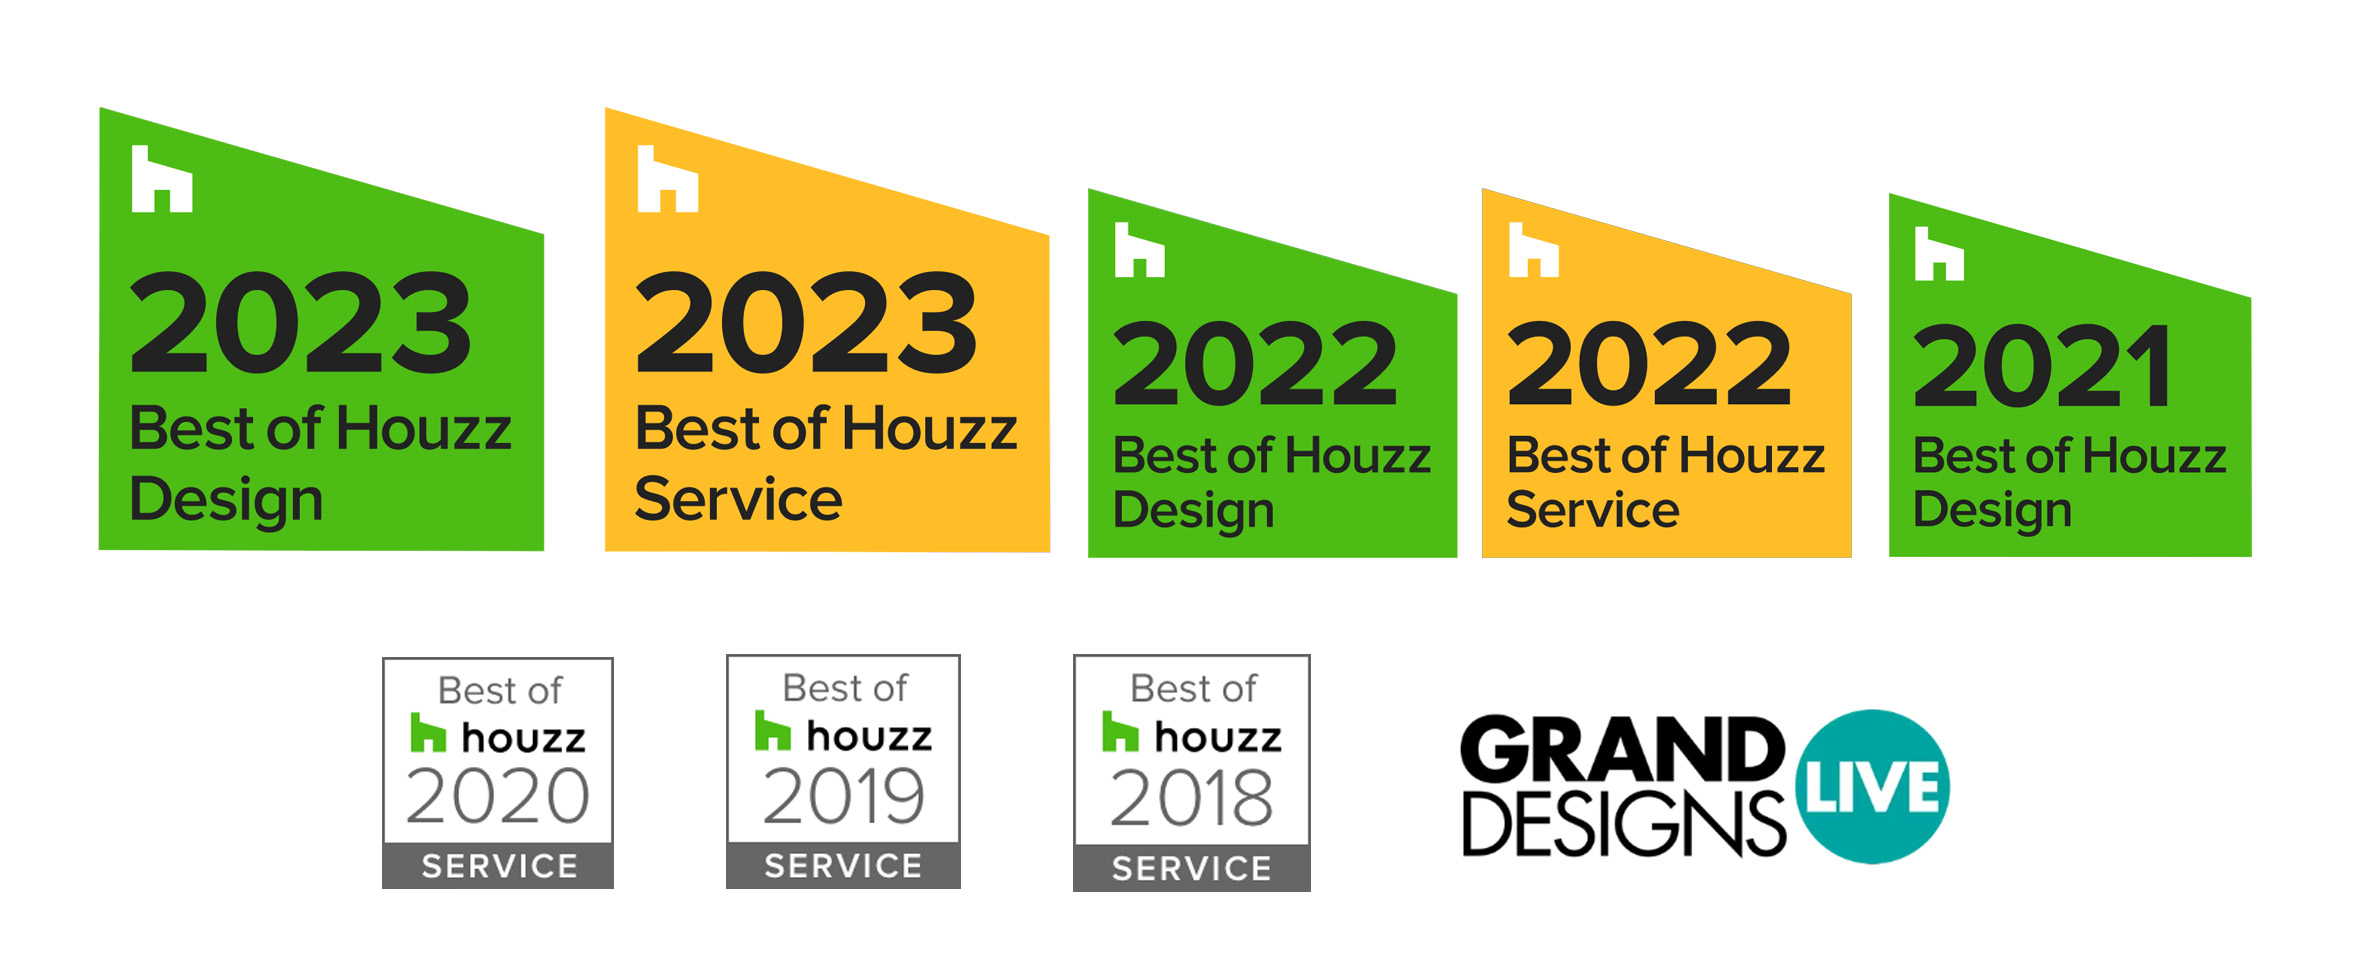 Awarded Best of Houzz Design and Service 2023,2022,2021, 2020,2019,2018 and twice winnder at Grand Designs Live